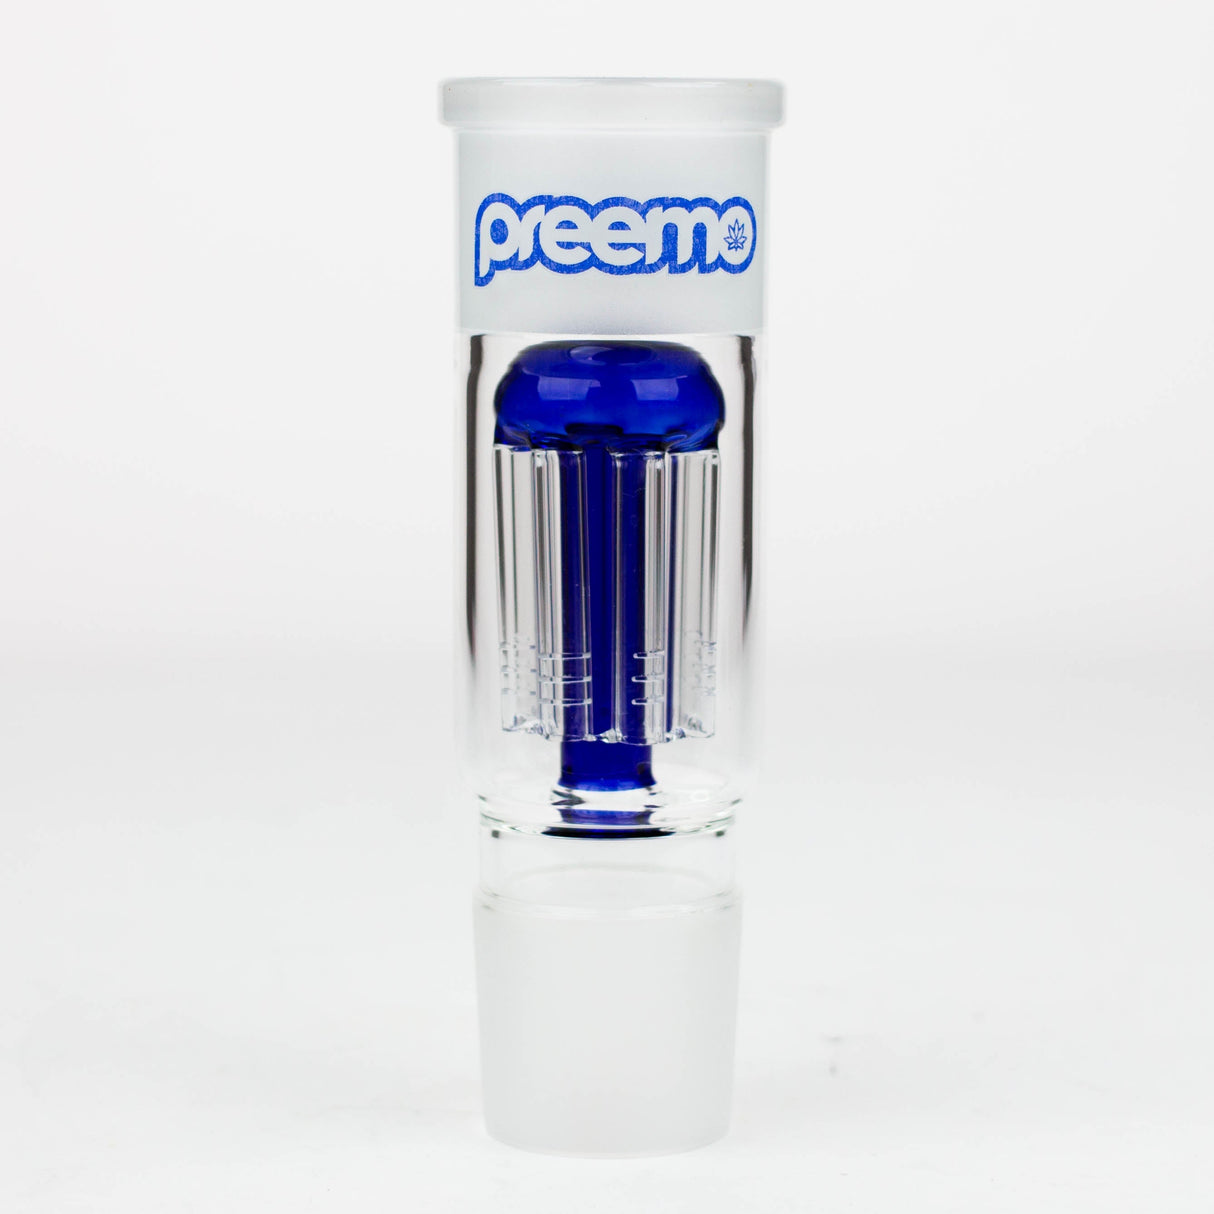 preemo - 5 inch 8-Arm Tree Perc Middle [P007]